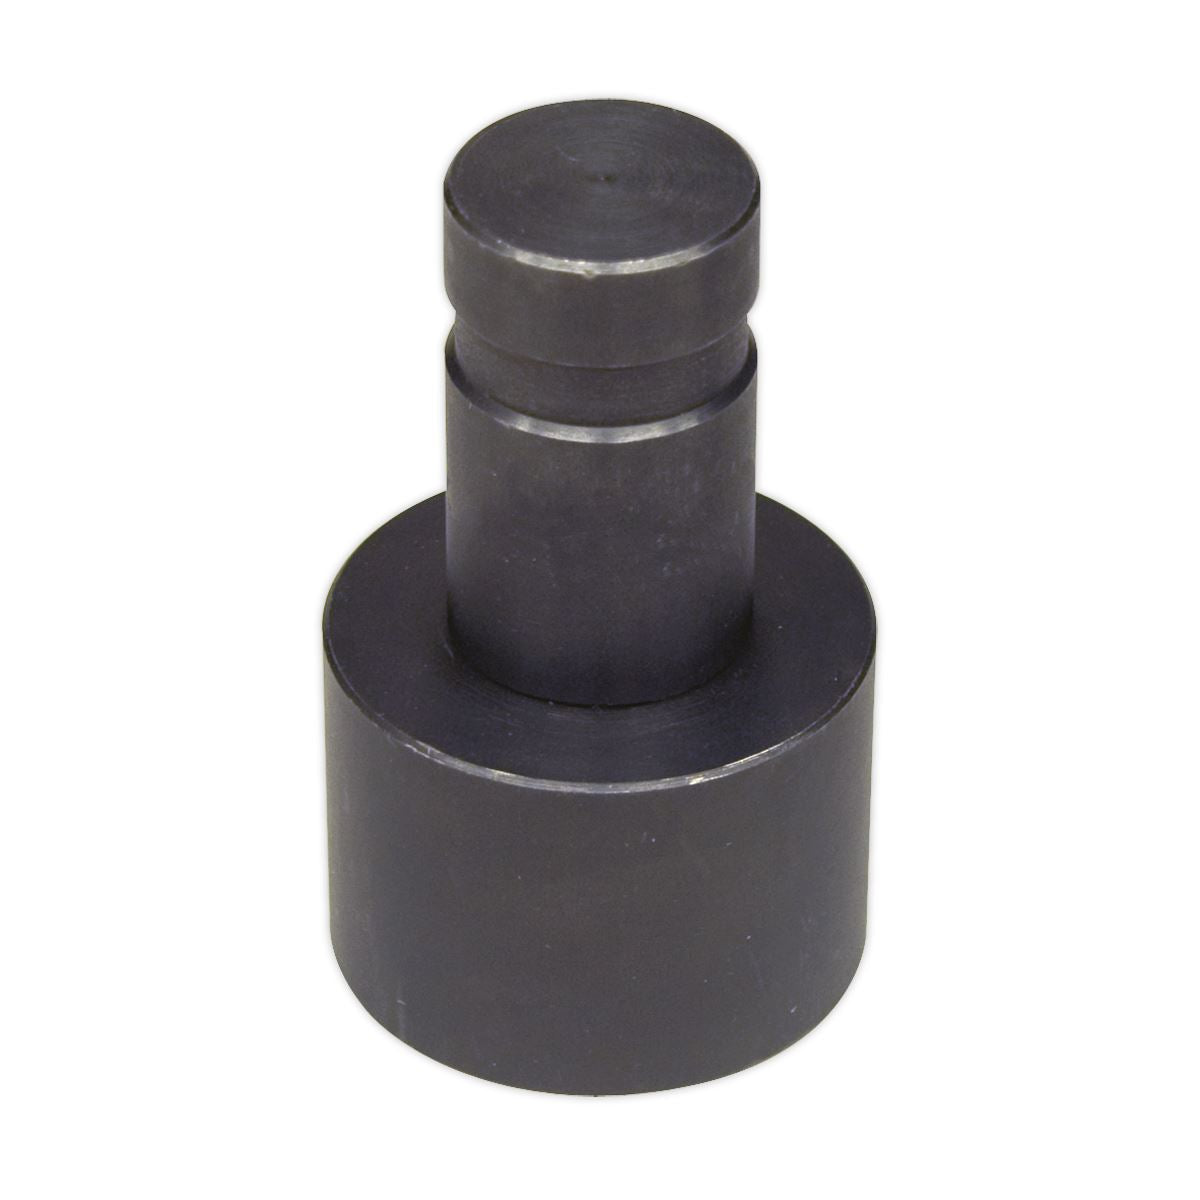 Sealey Adaptor for Oil Filter Crusher Ø60 x 115mm